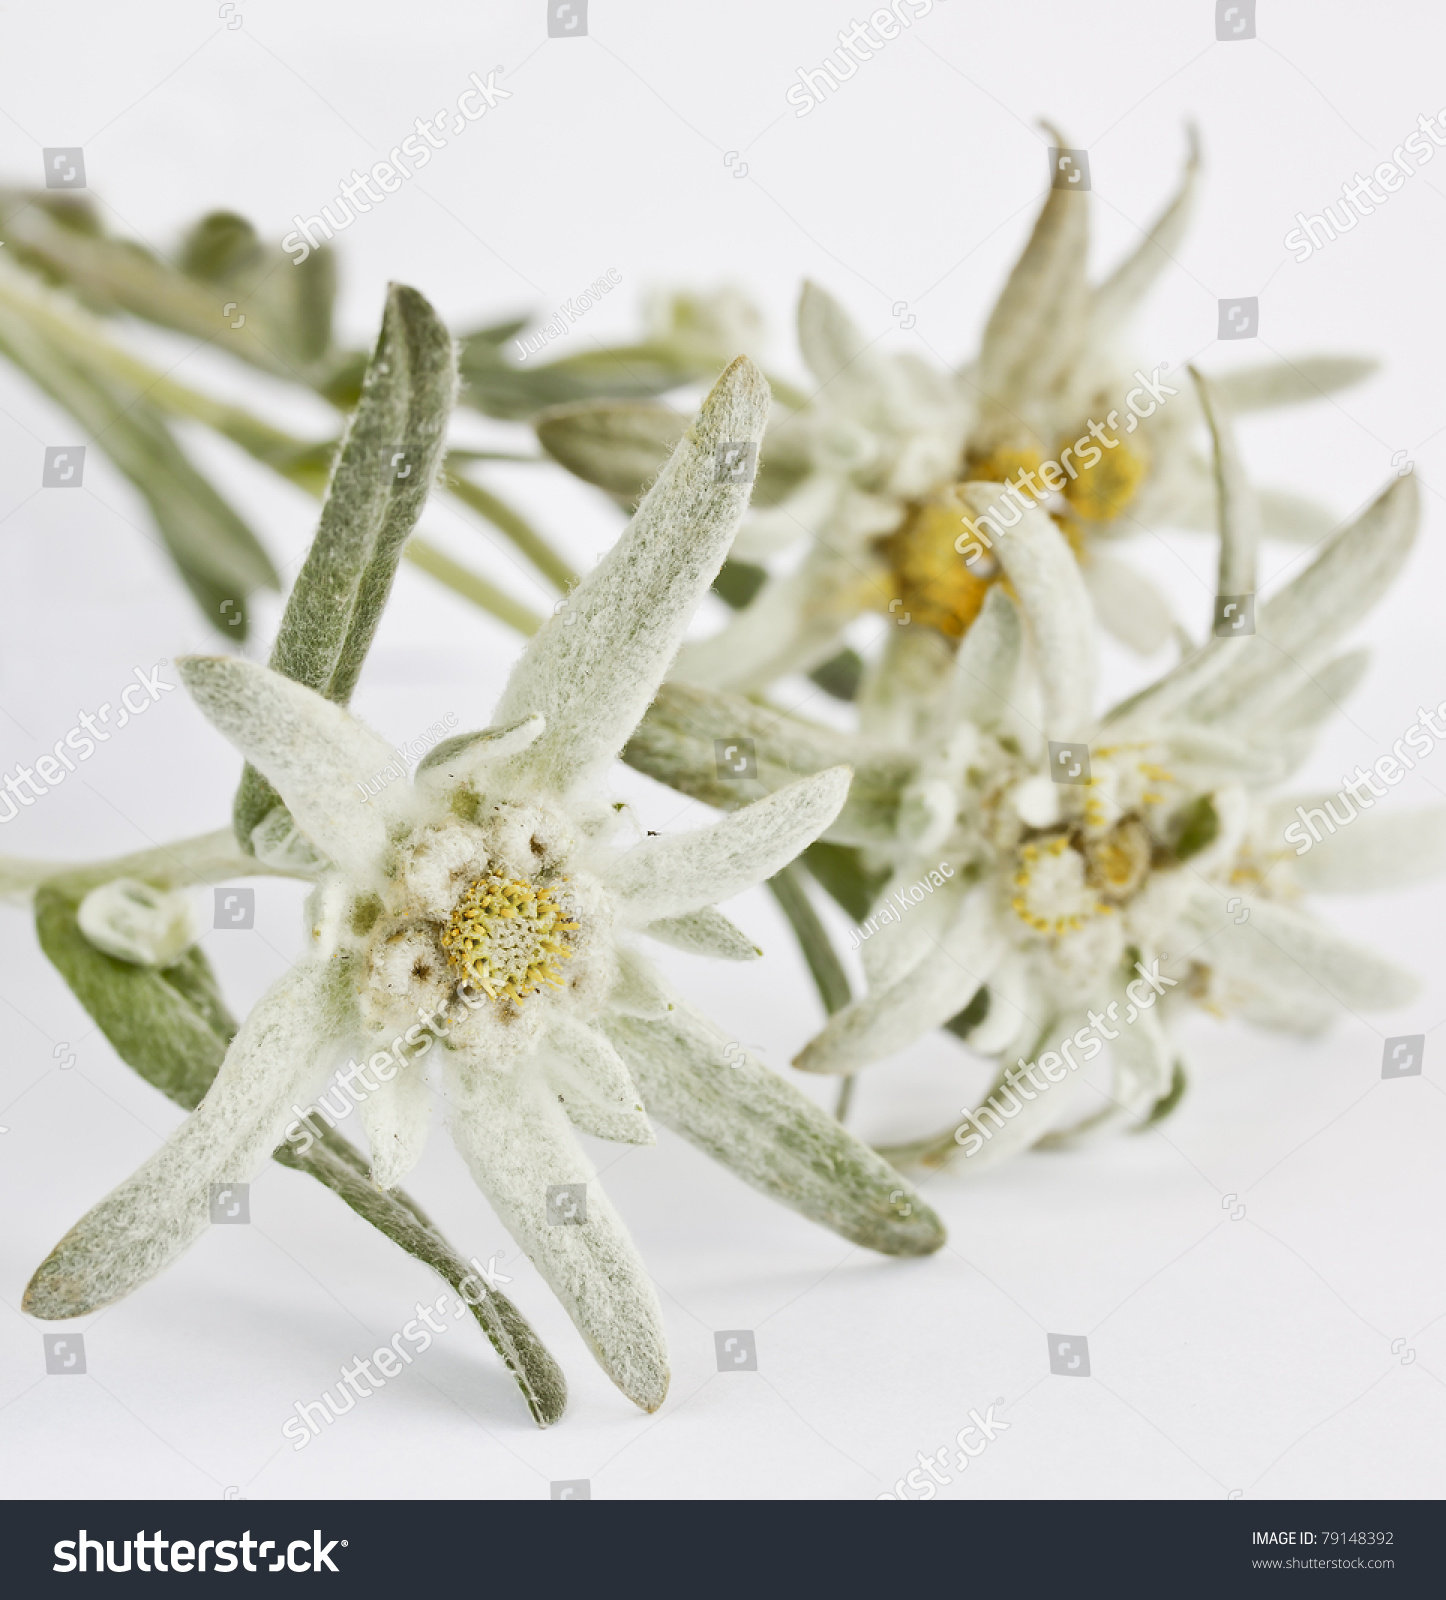 Edelweiss Flower Isolated On White Background Stock Photo ...